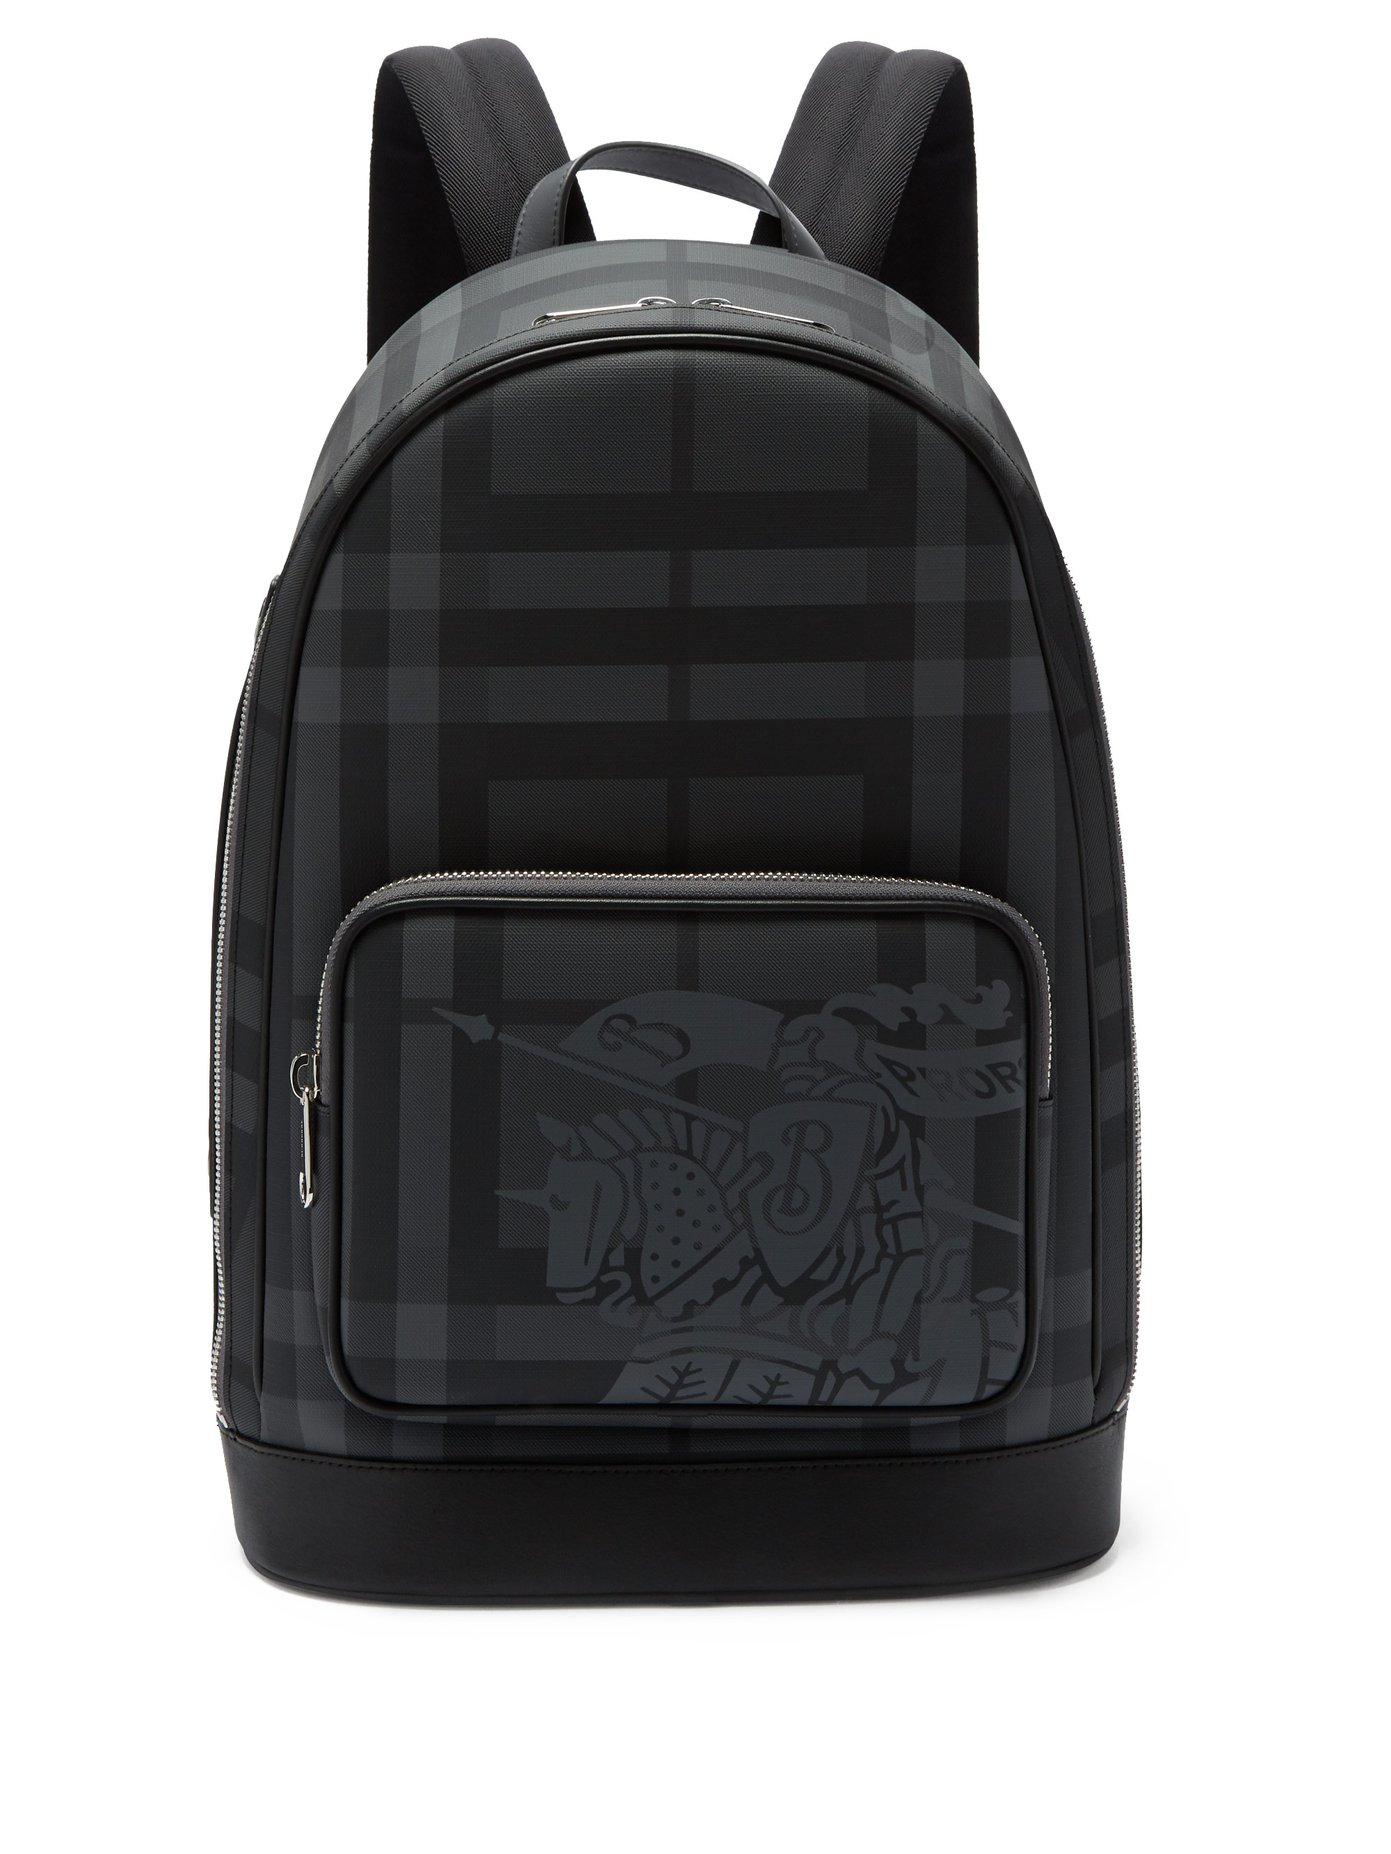 EKD London check and leather backpack 